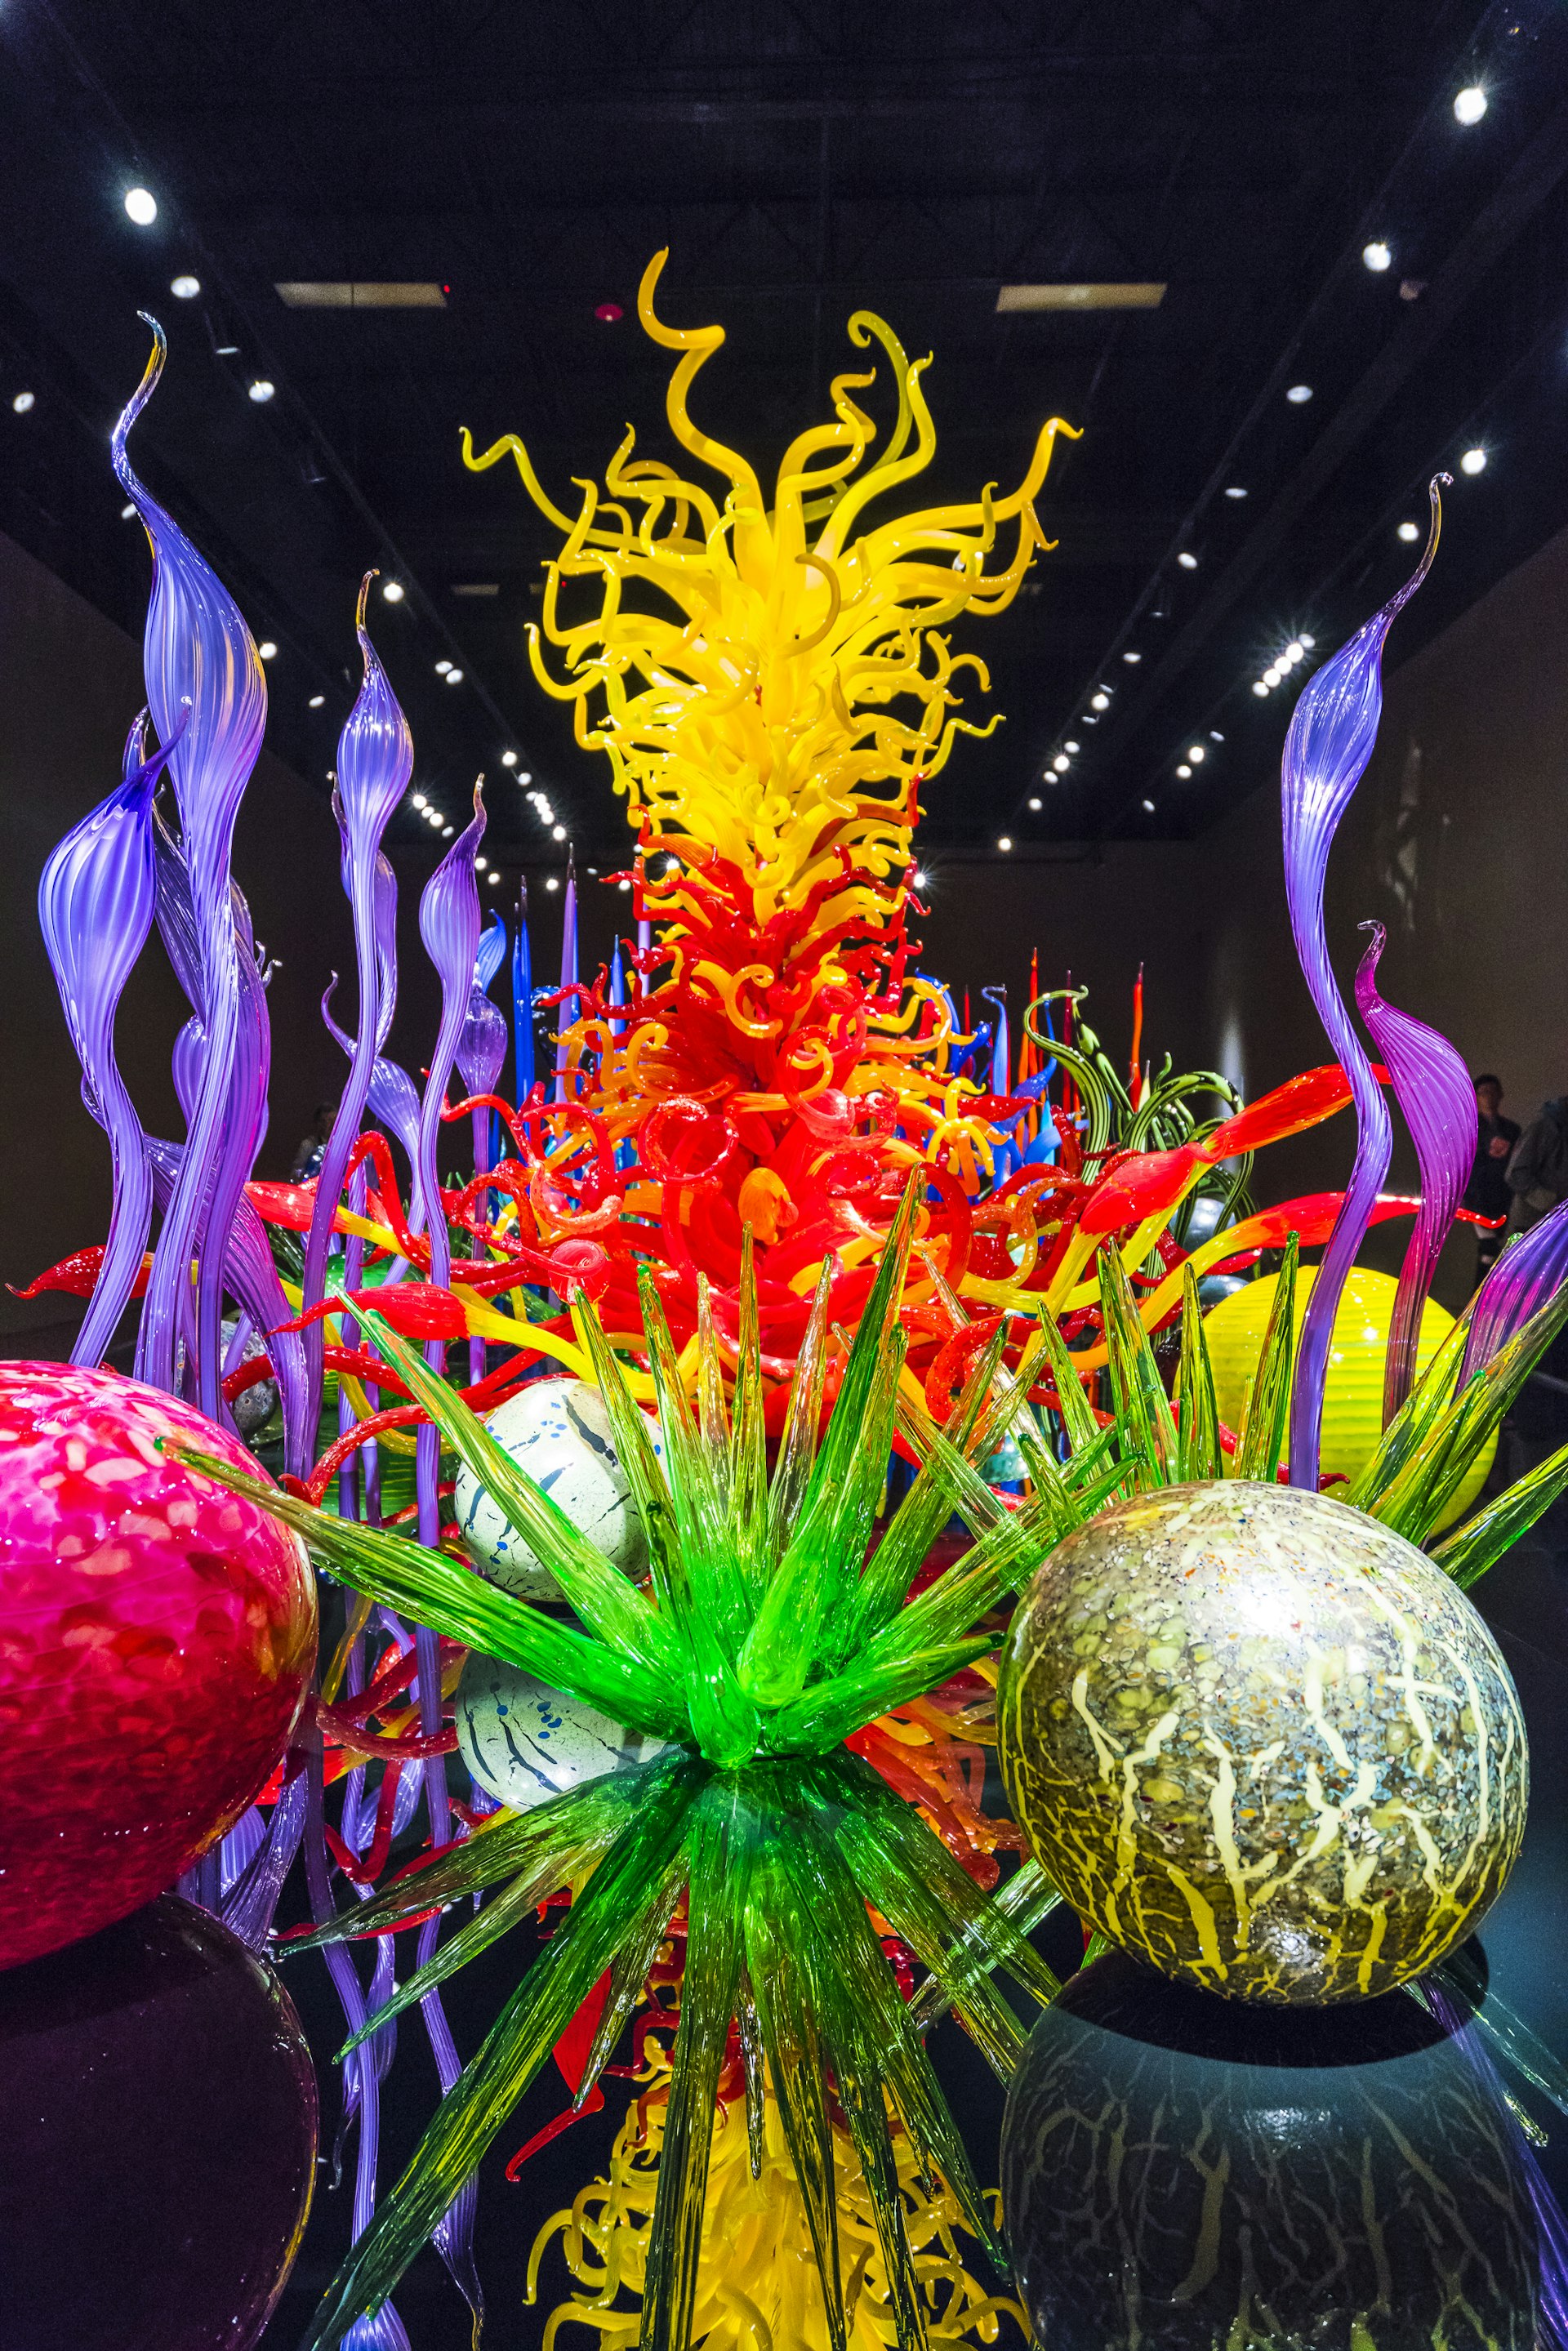 Blown glass in abstract shapes in red and yellow, Chihuly Garden and Glass Museum, Seattle